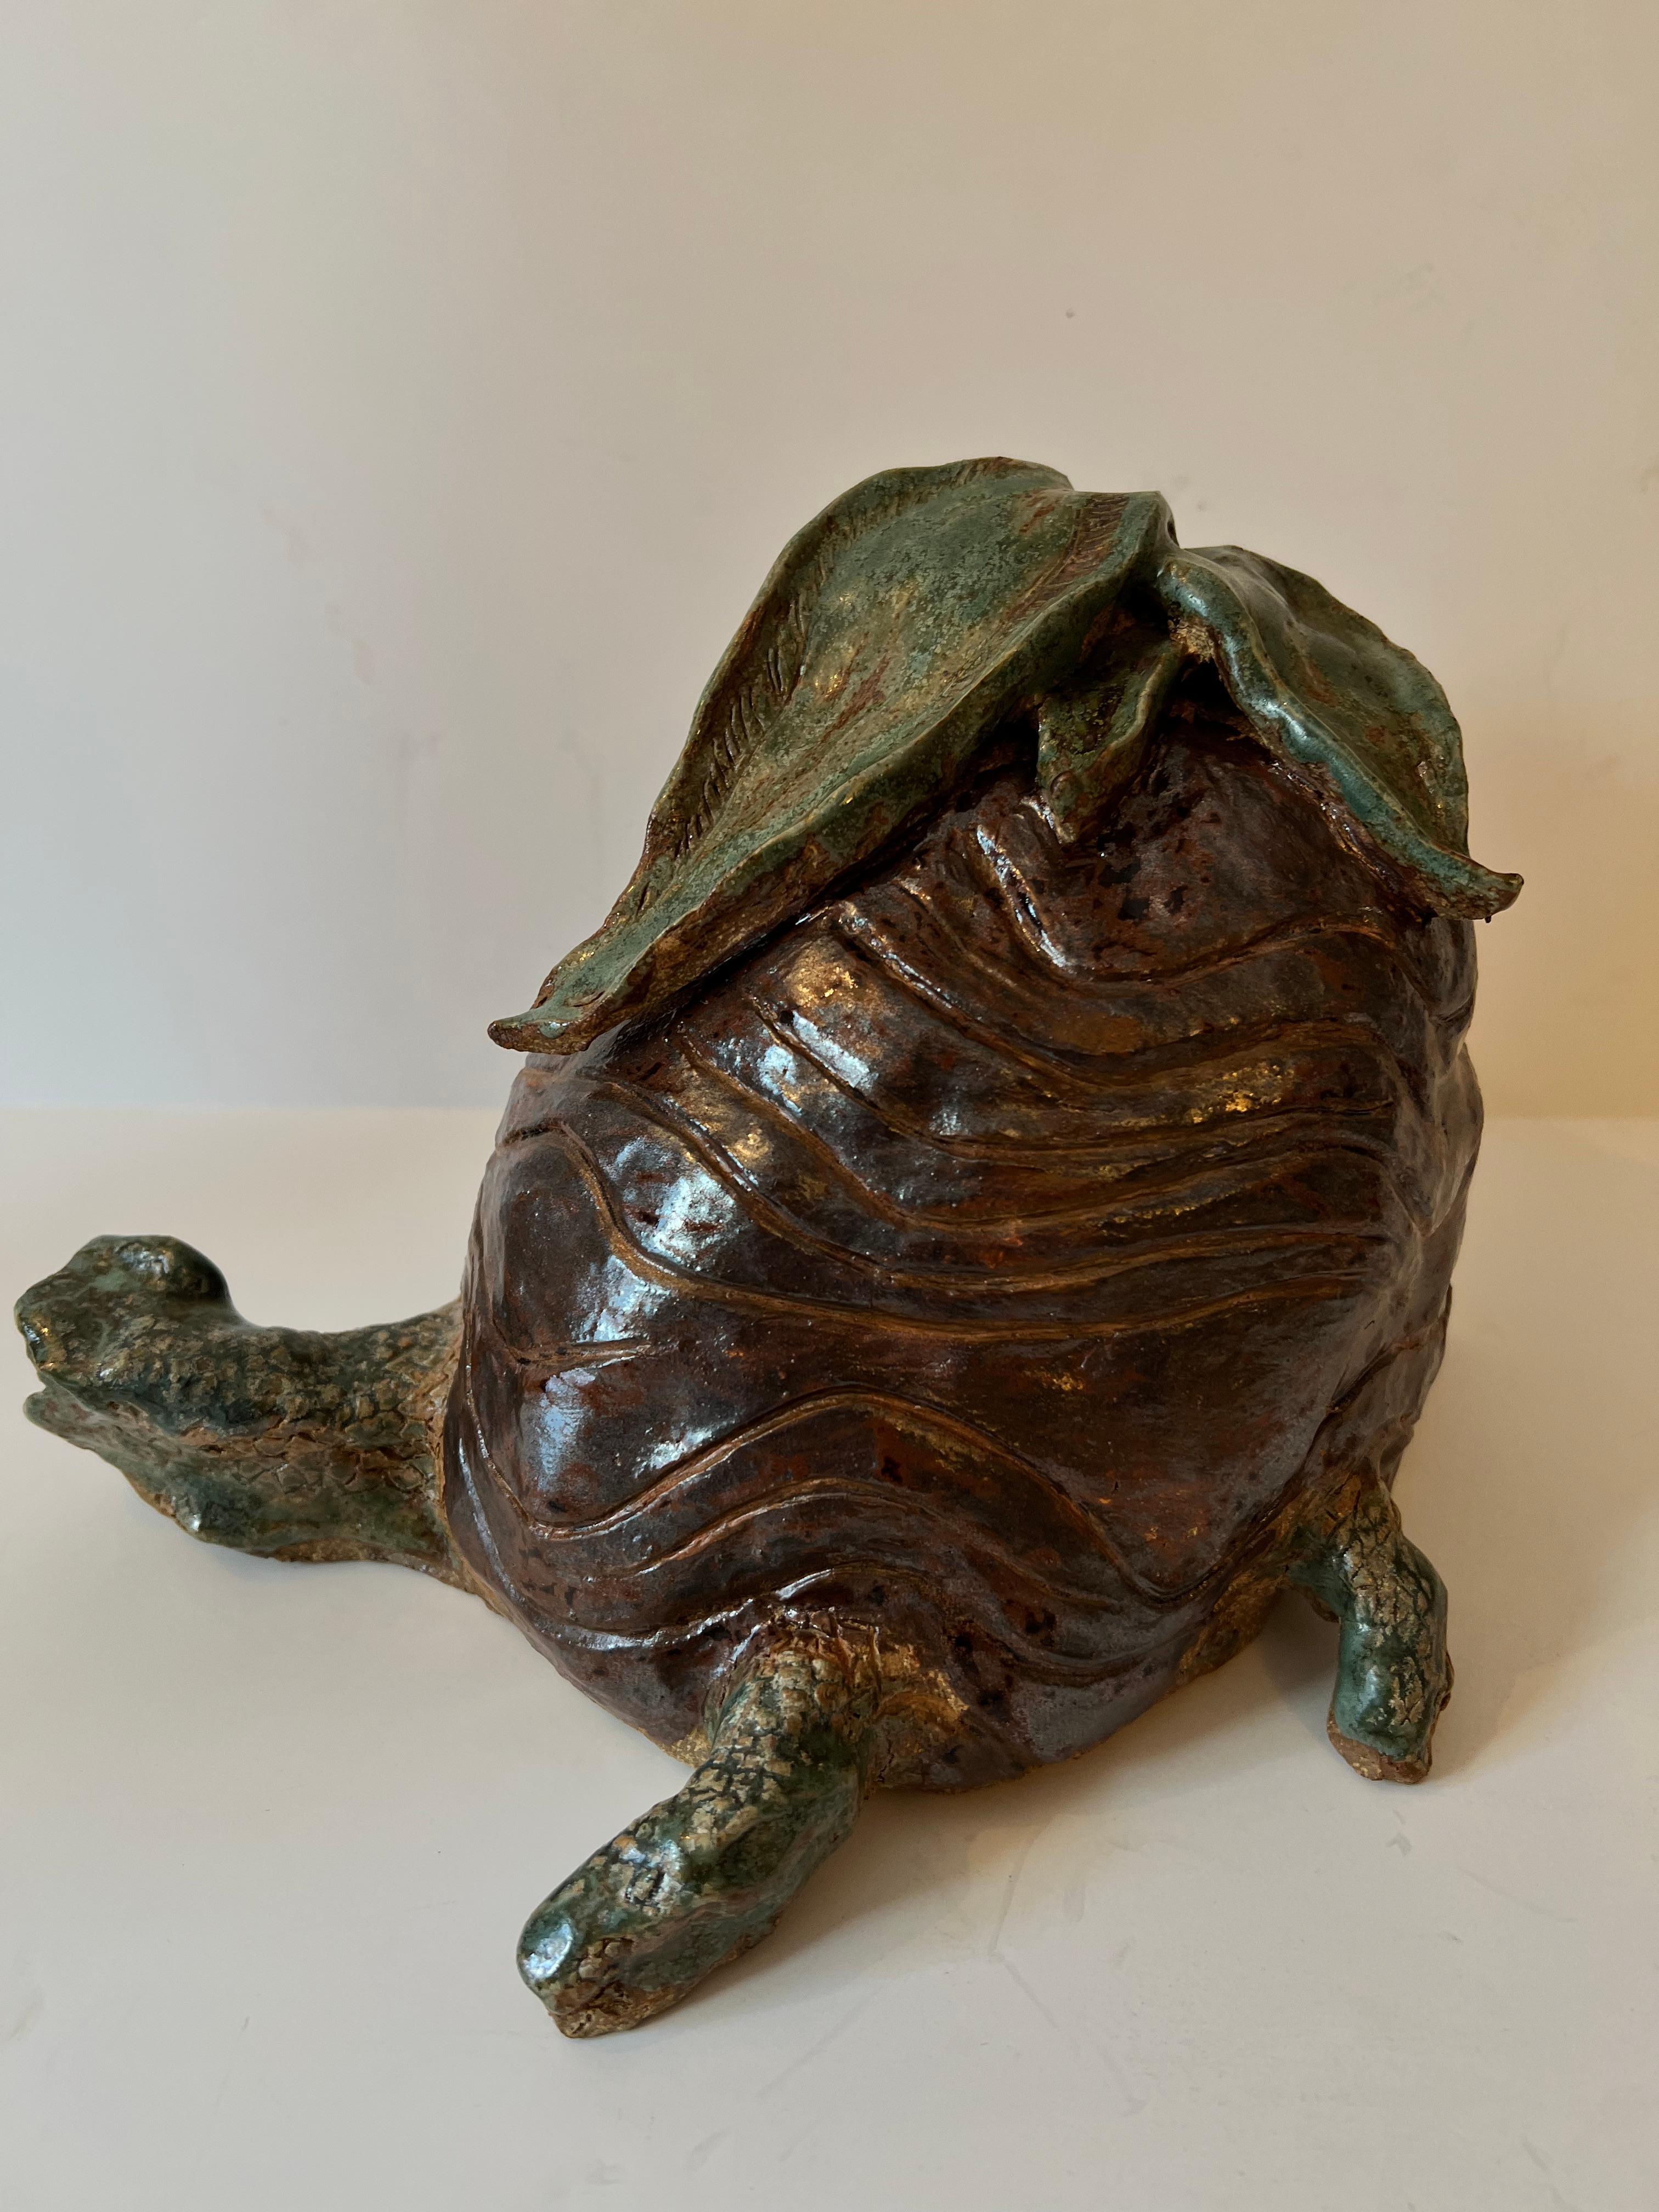 A hand made studio pottery turtle. The piece is quite unique and would make a perfect decorative item in many rooms, especially the Childs room or garden area. The piece is also sturdy and heavy enough to be a door stop.